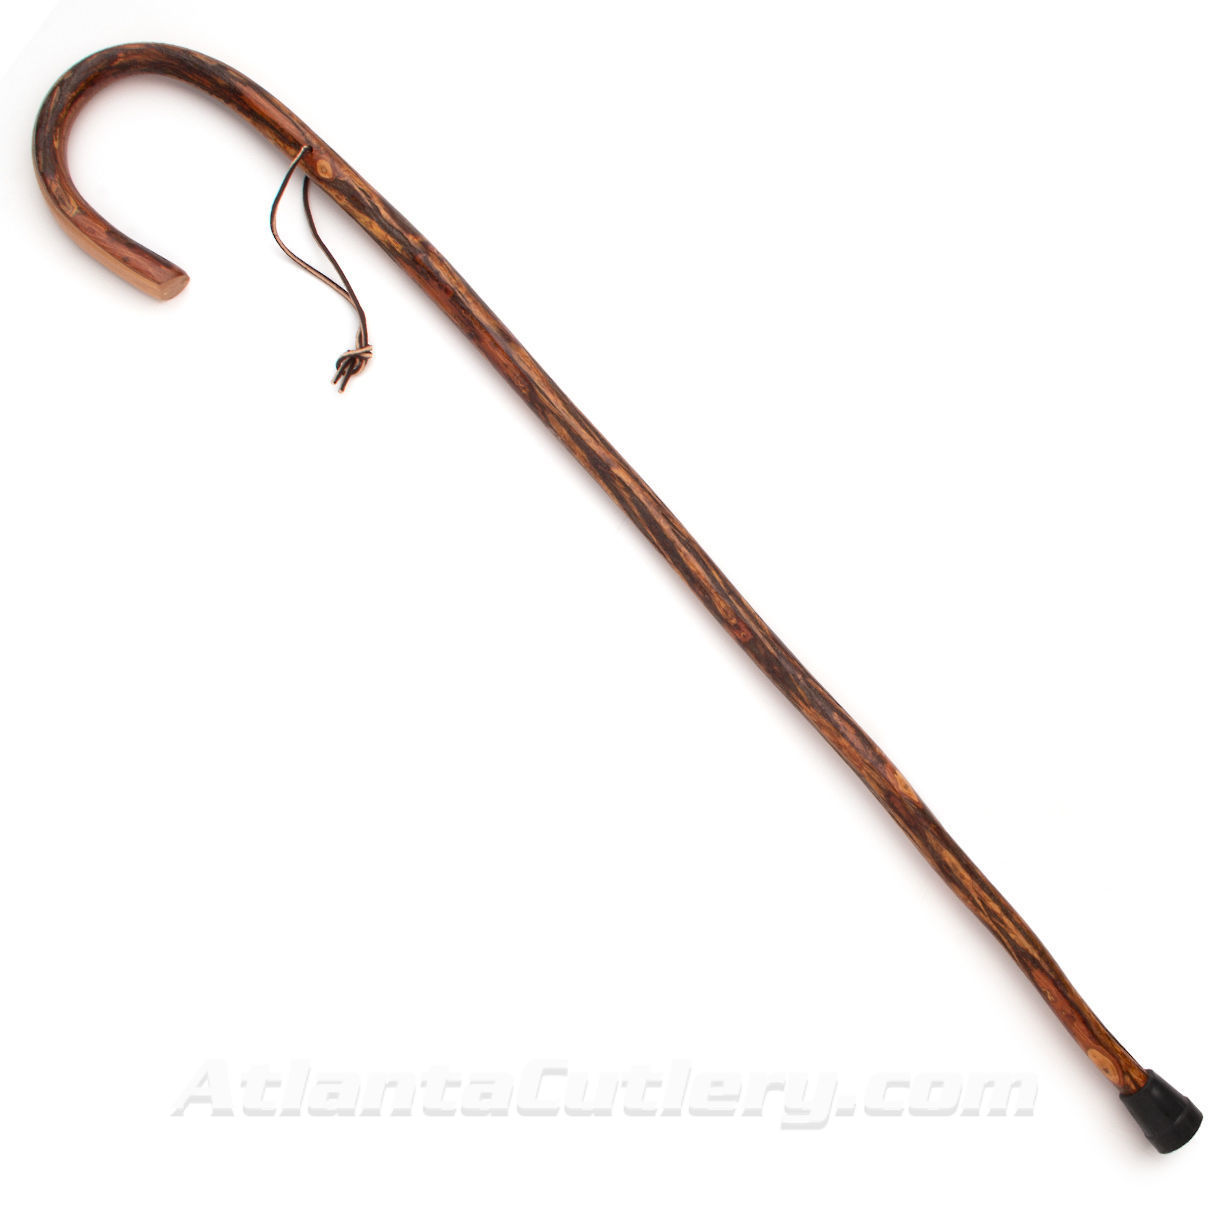 Whistle Creek Gentleman’s Variegated Hickory Cane made in USA is weatherproofed and has leather wrist strap and a rubber tip